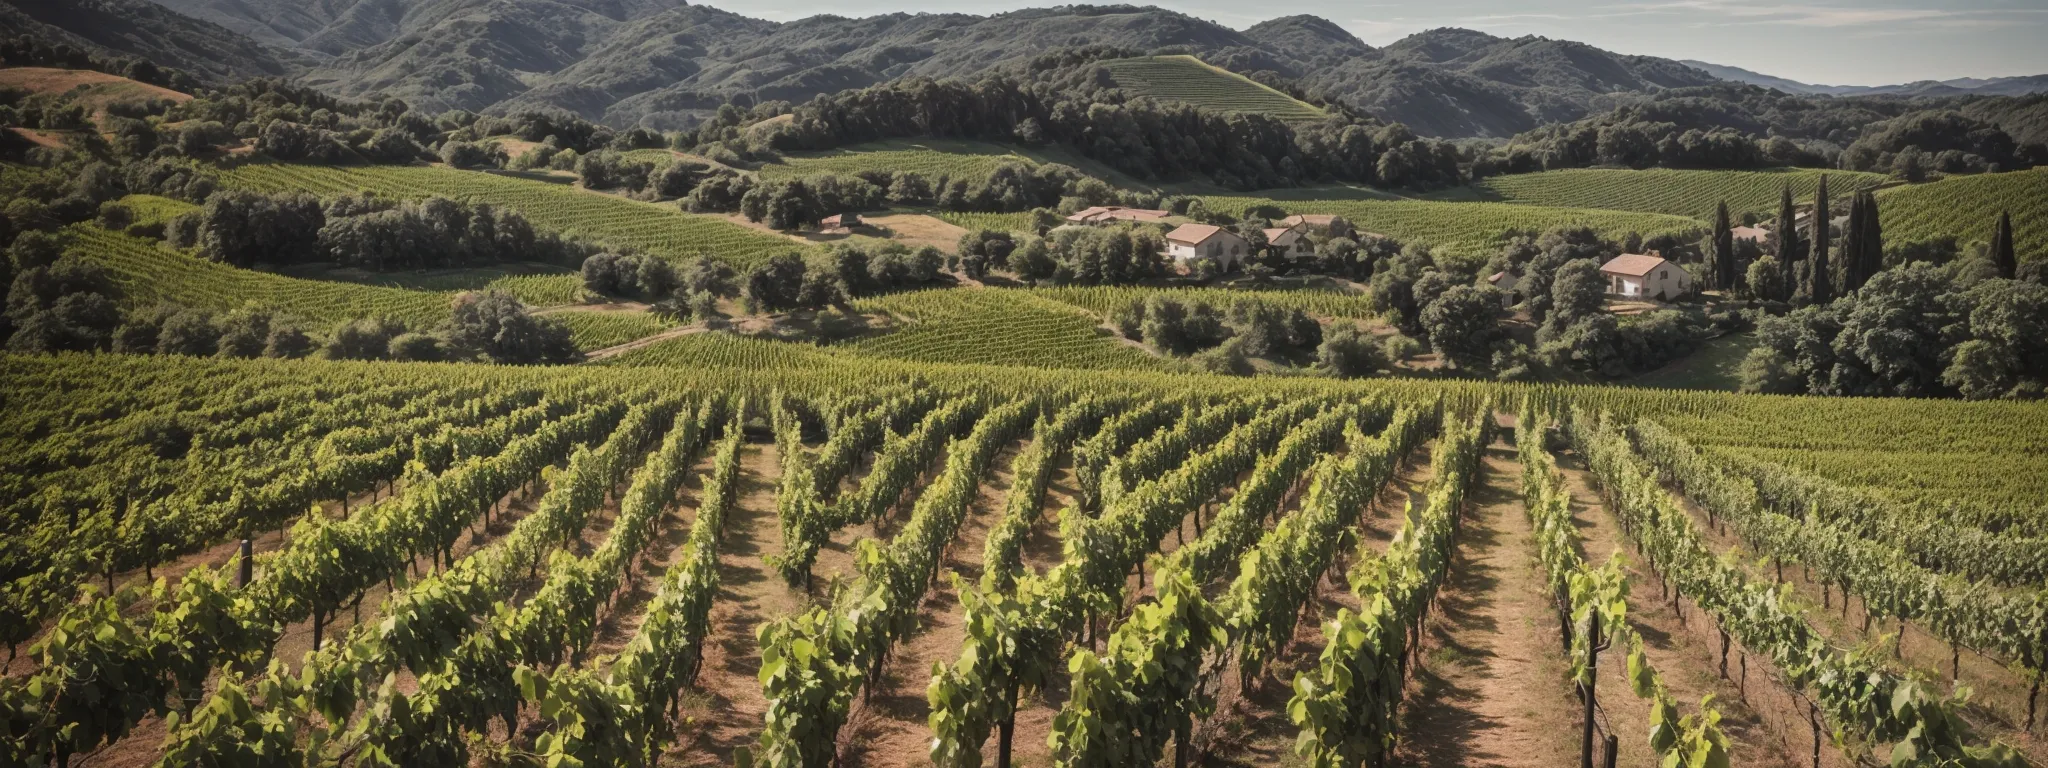 a vineyard panoramic view under a clear sky, illustrating the serene atmosphere of a winery awaiting discovery through online search.